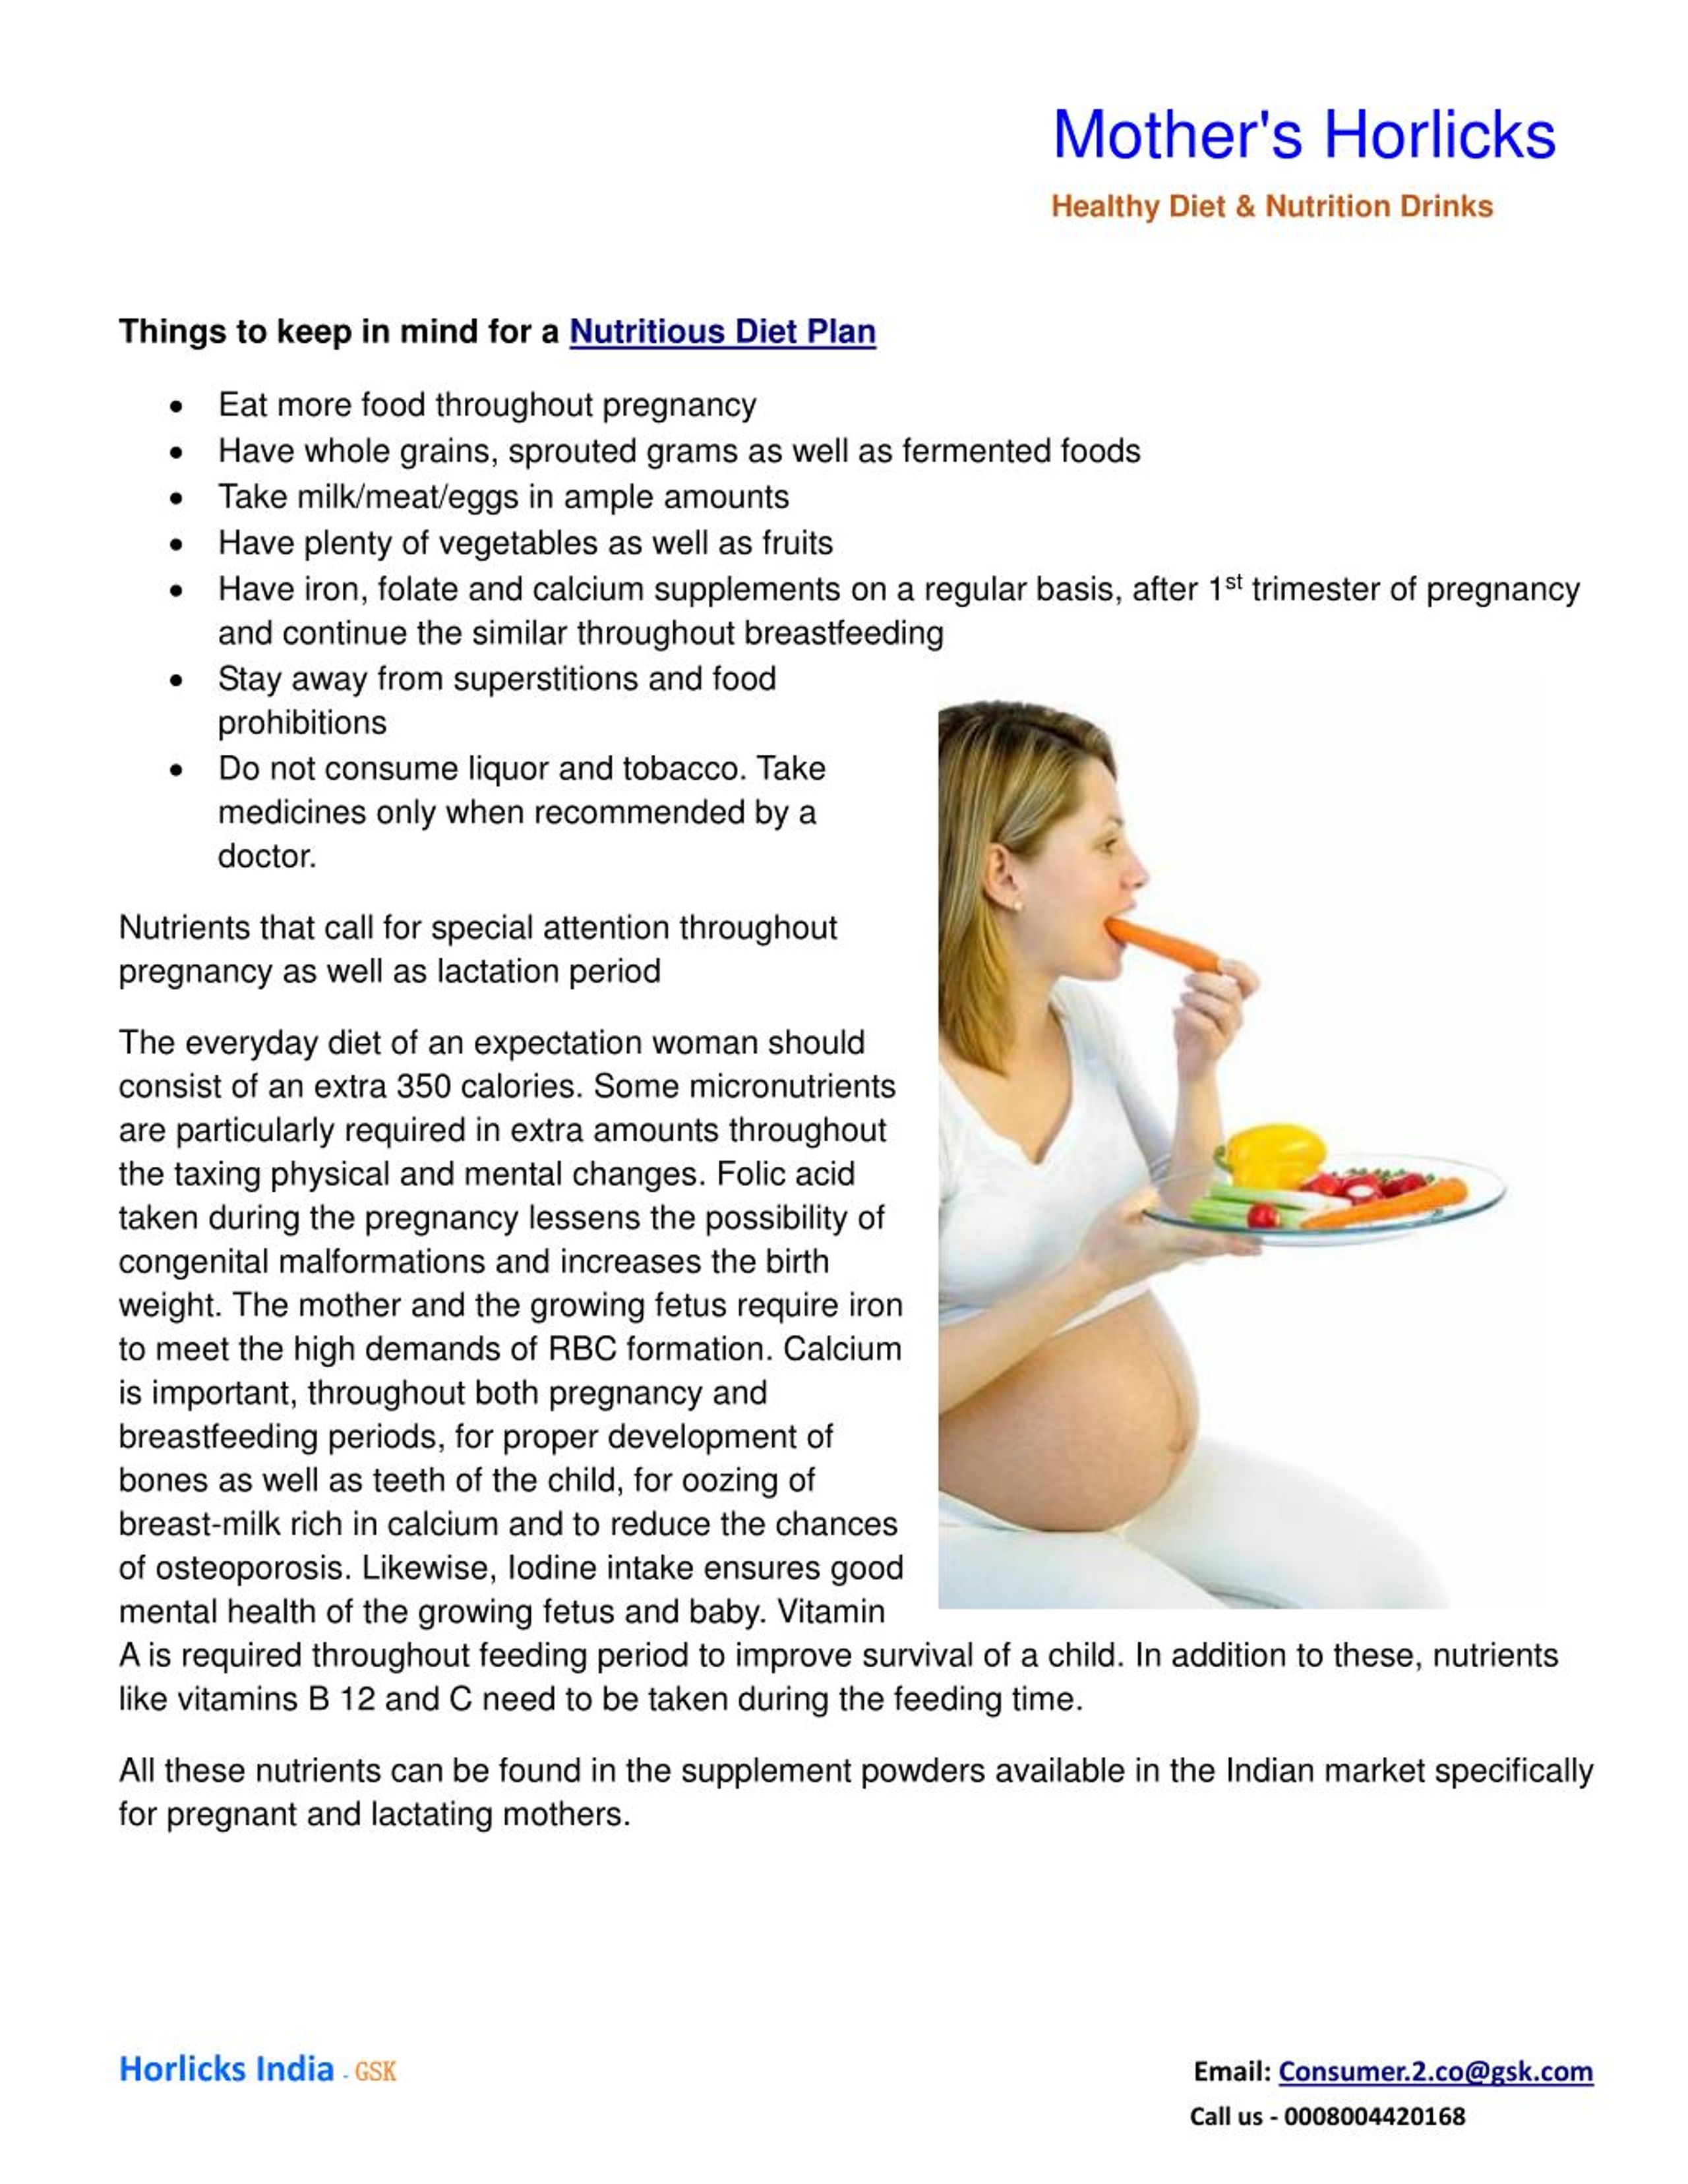 Balanced diet for a lactating mother